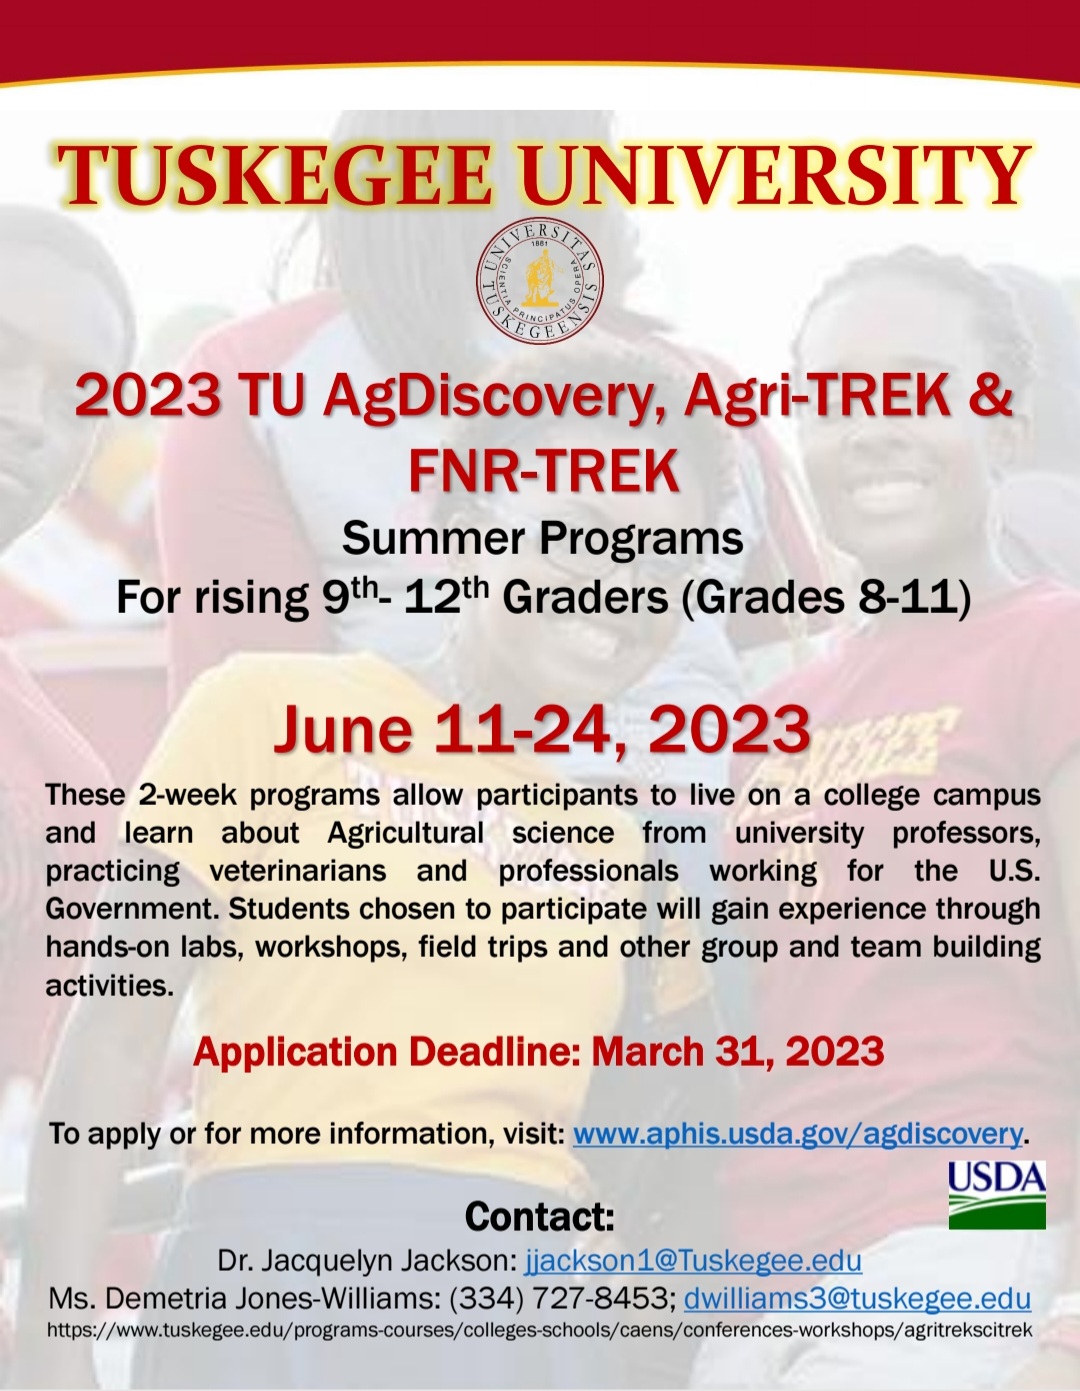 Tuskegee University - AgriTREK/SciTREK Summer Institute and the AgDiscovery Summer Program will be held June 11-24, 2023. Participants will live on campus and learn from university professors, veterinarians, and other professionals. Application deadline is March 31. For more program information, please contact:  Demetria Jones-Williams, Administrative/Program Assistant at 334-727-8453 or dwilliams3@tuskegee.edu